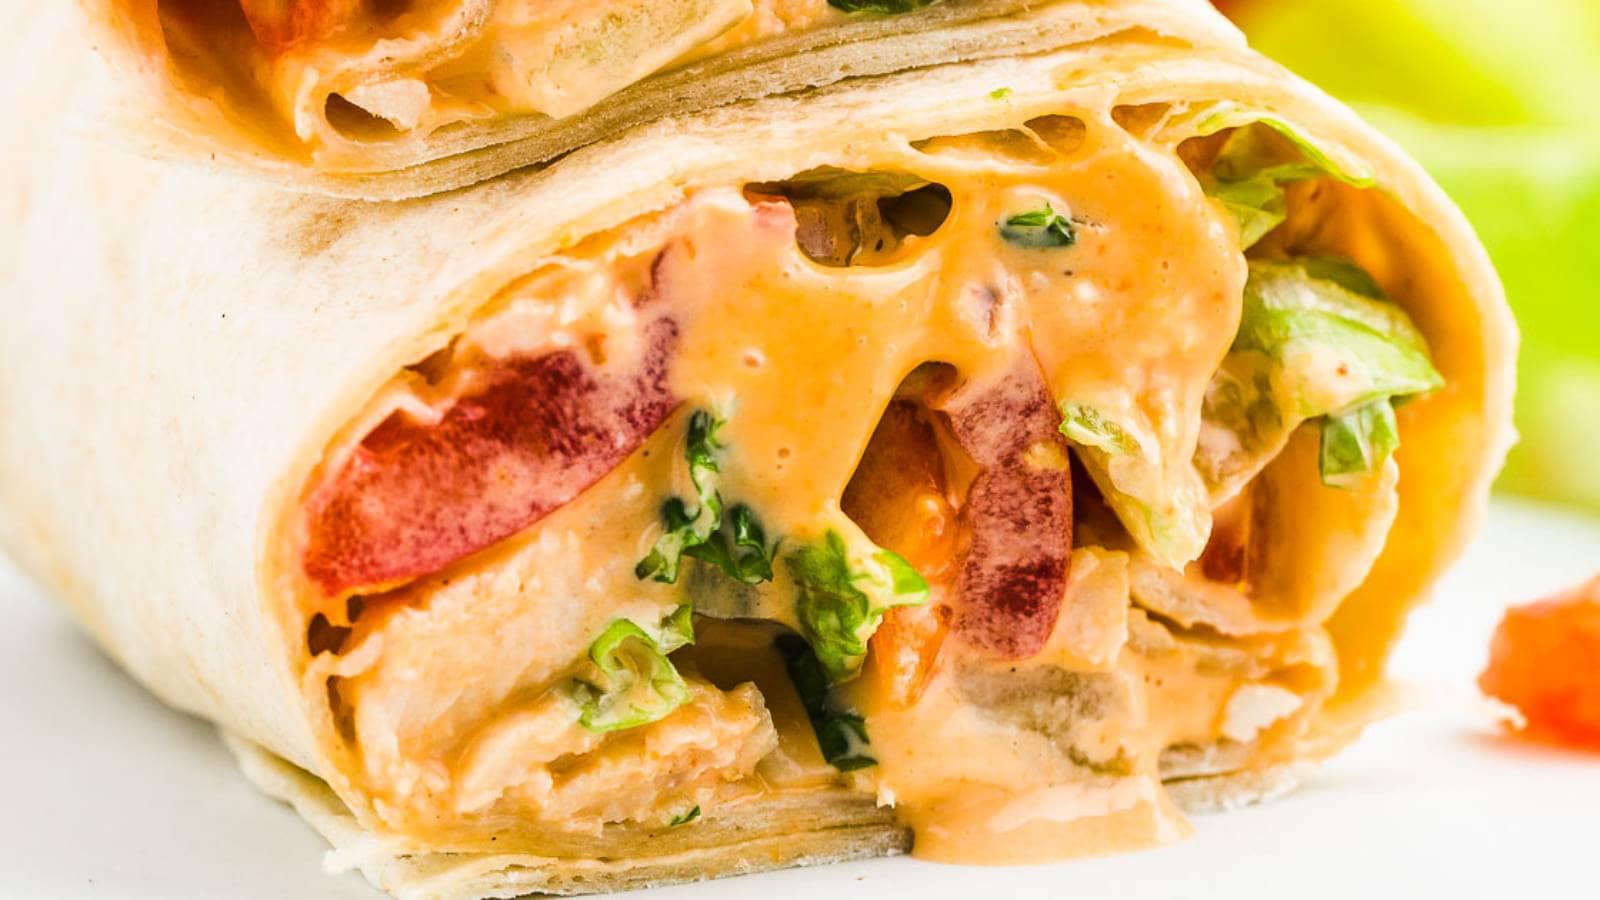 Chipotle Chicken Wrap recipe by Cheerful Cook.